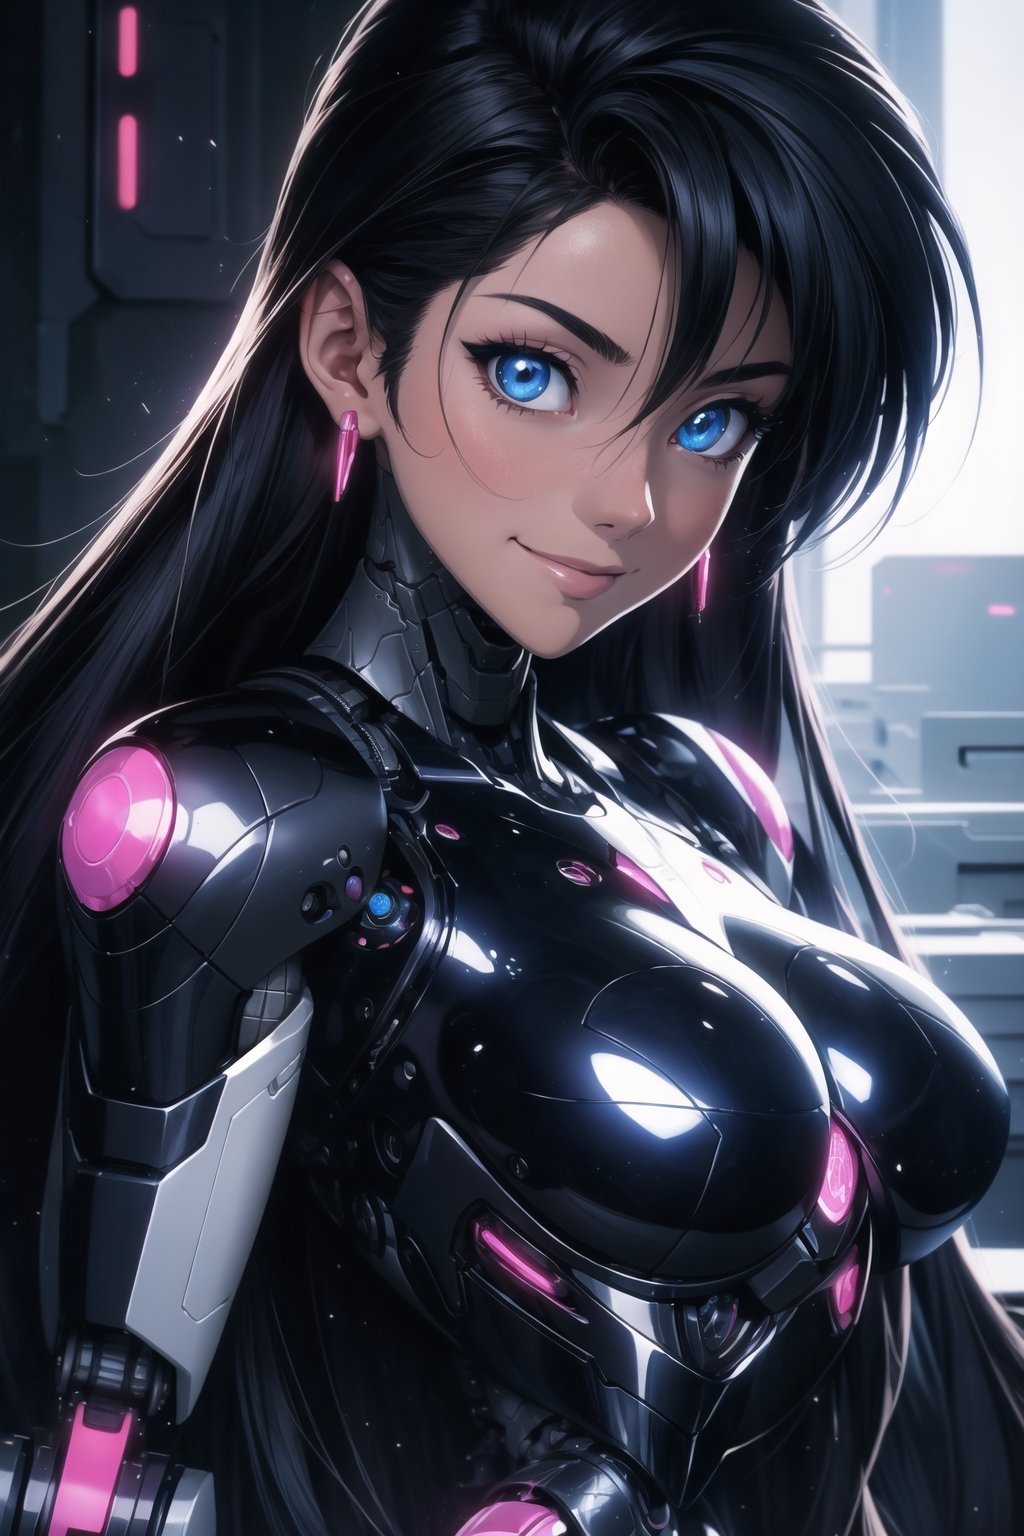 (masterpiece, best quality), (8K, UHD), ((90s anime style)), dark fantasy fembot, an alluring robotic body, with a lean hourlgass shape, high tech design, seductive cybernetic eyes, nice chest, in a futuristic high tech society, different seductive poses, smiling at the viewer, (variety shot), illustration,portrait,rgbcolor,emotion